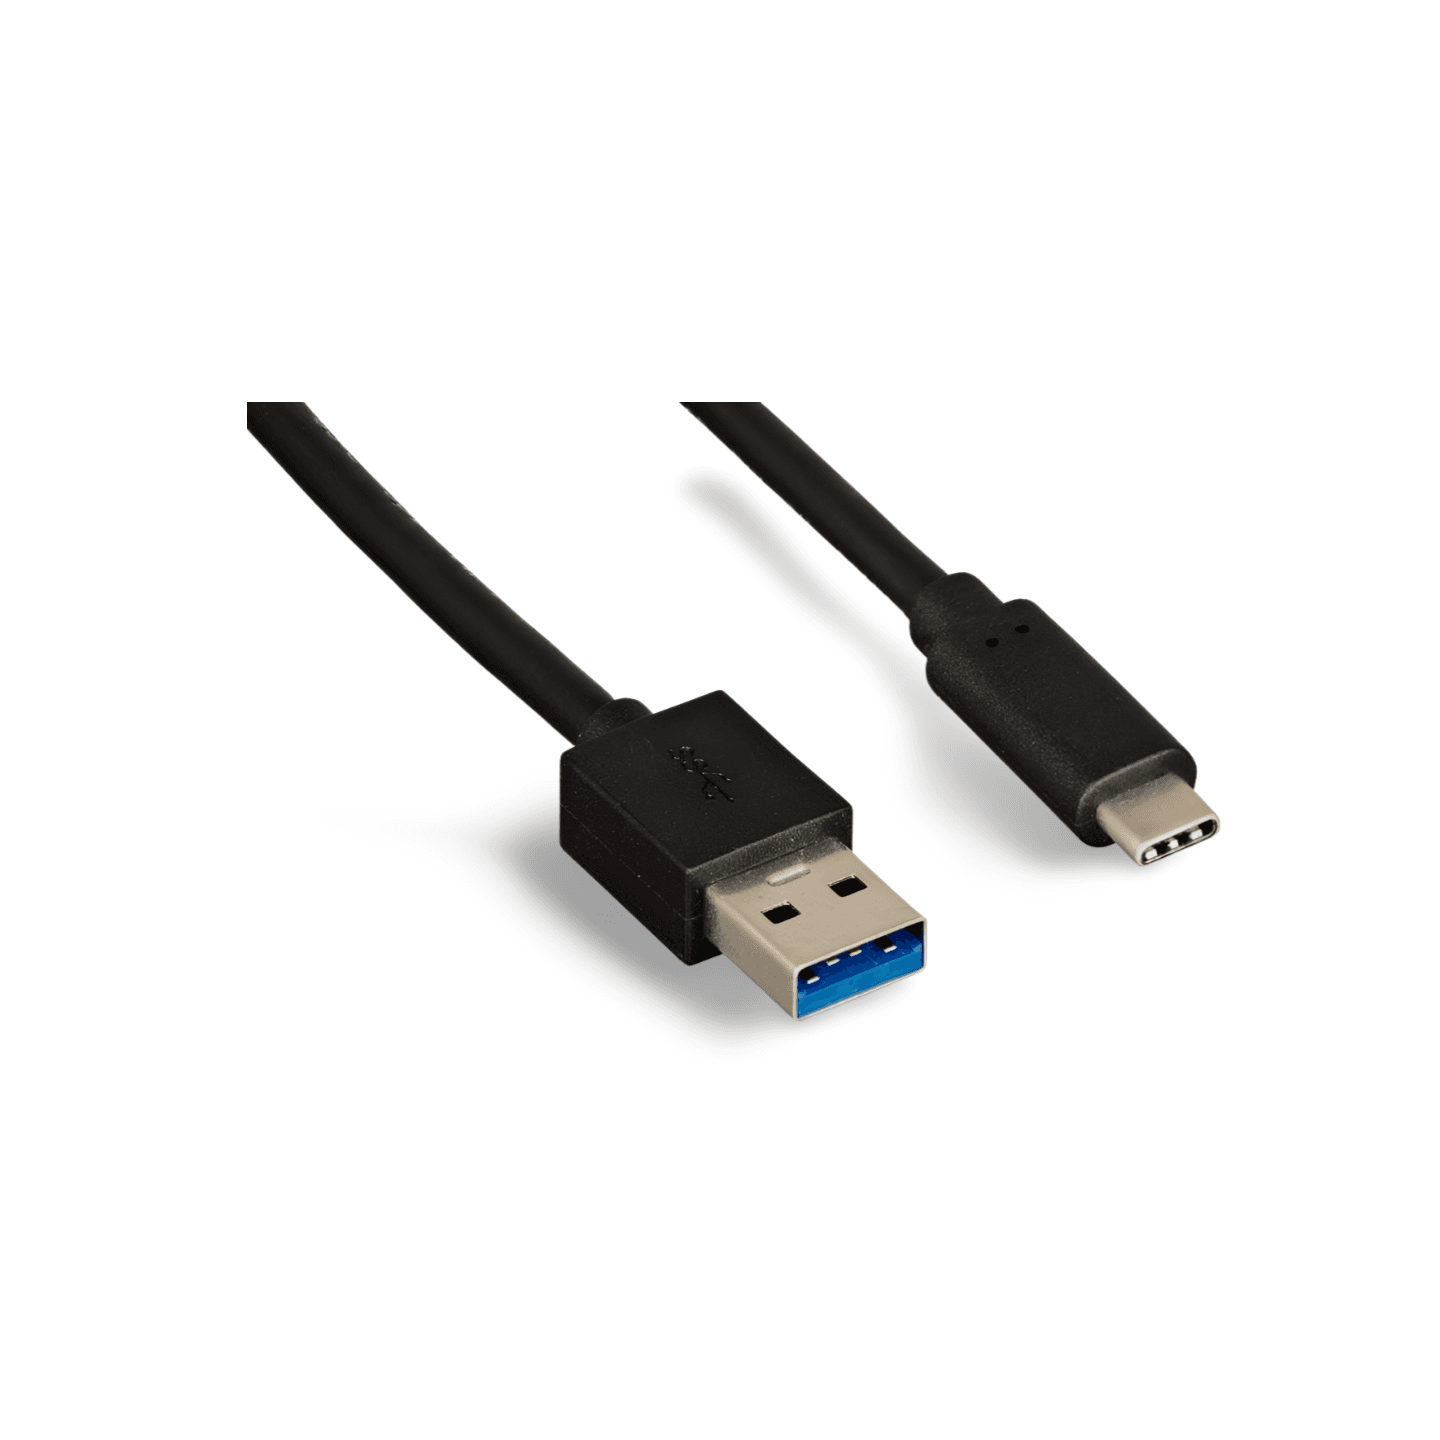 USB-C Type A to C USB 3.0 3ft Black Cable